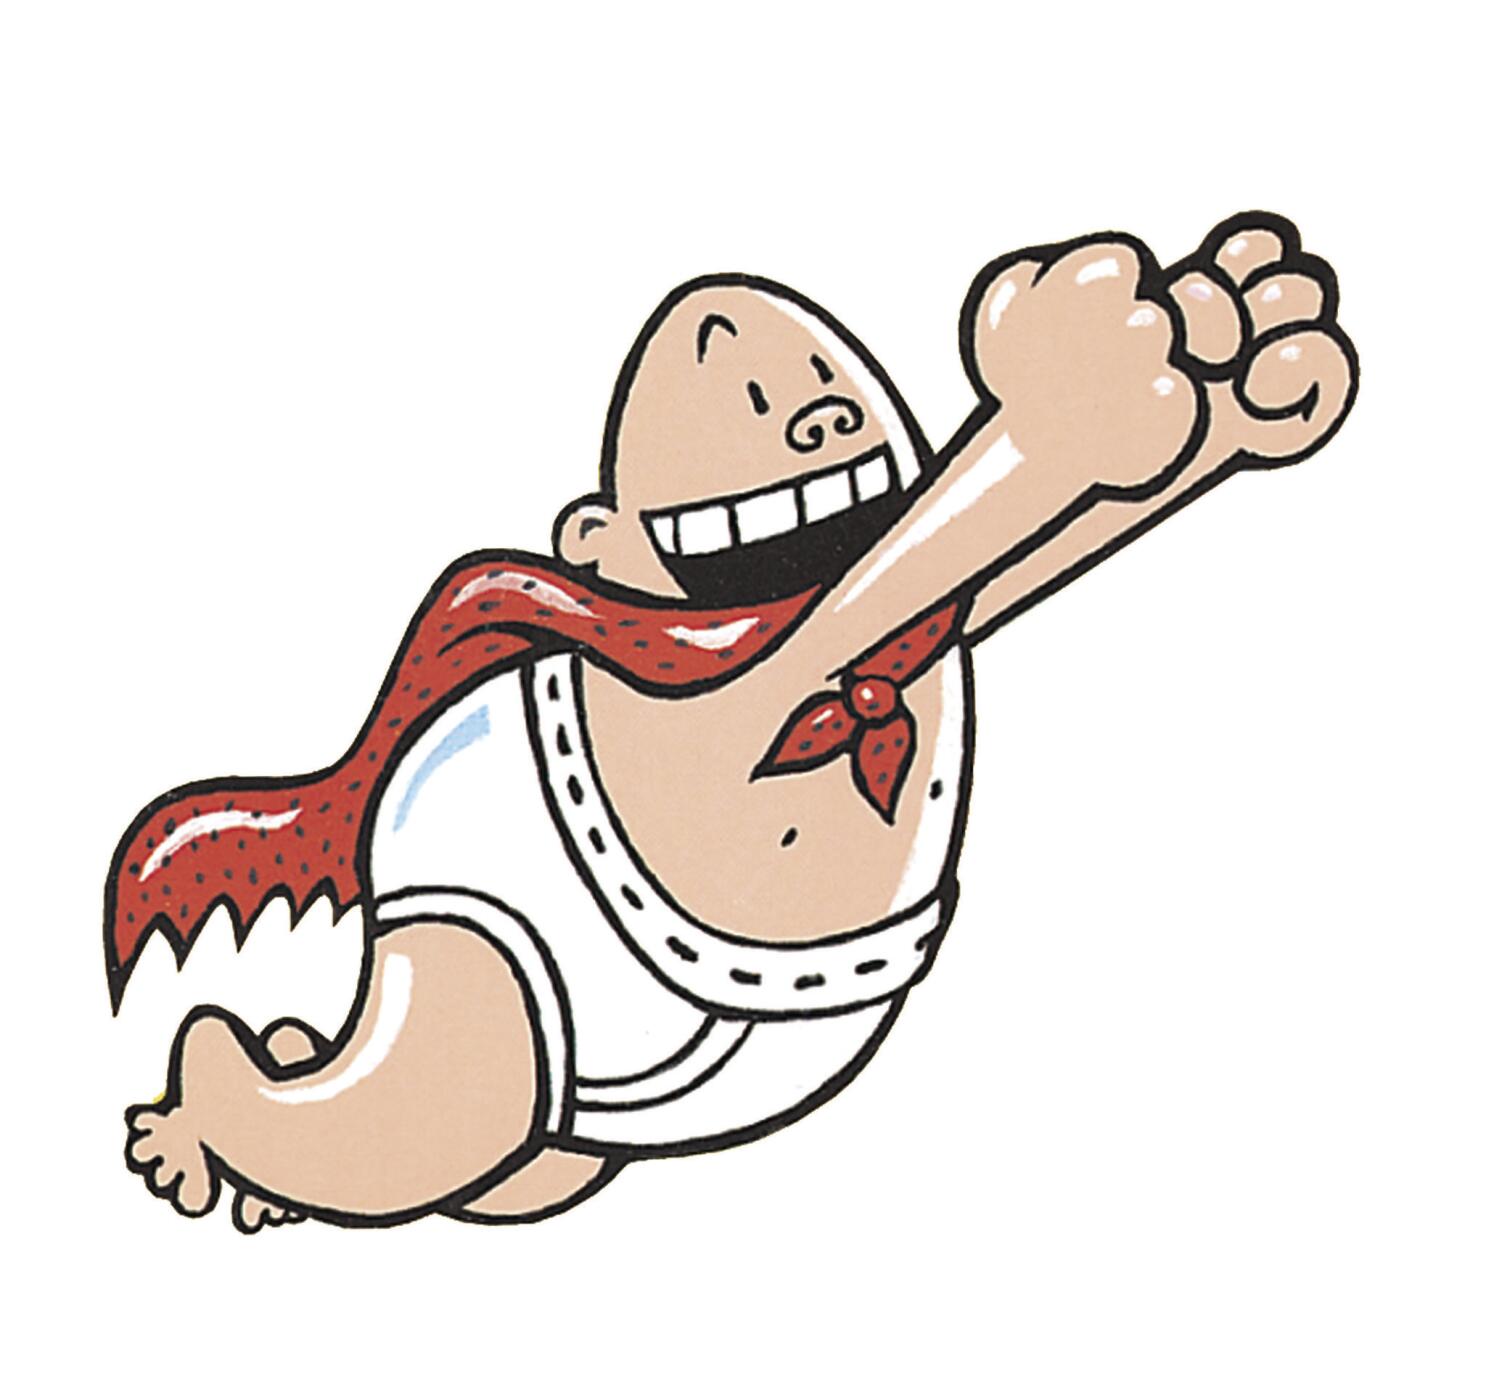 Captain Underpants' banned from school book fair over gay character - Los  Angeles Times